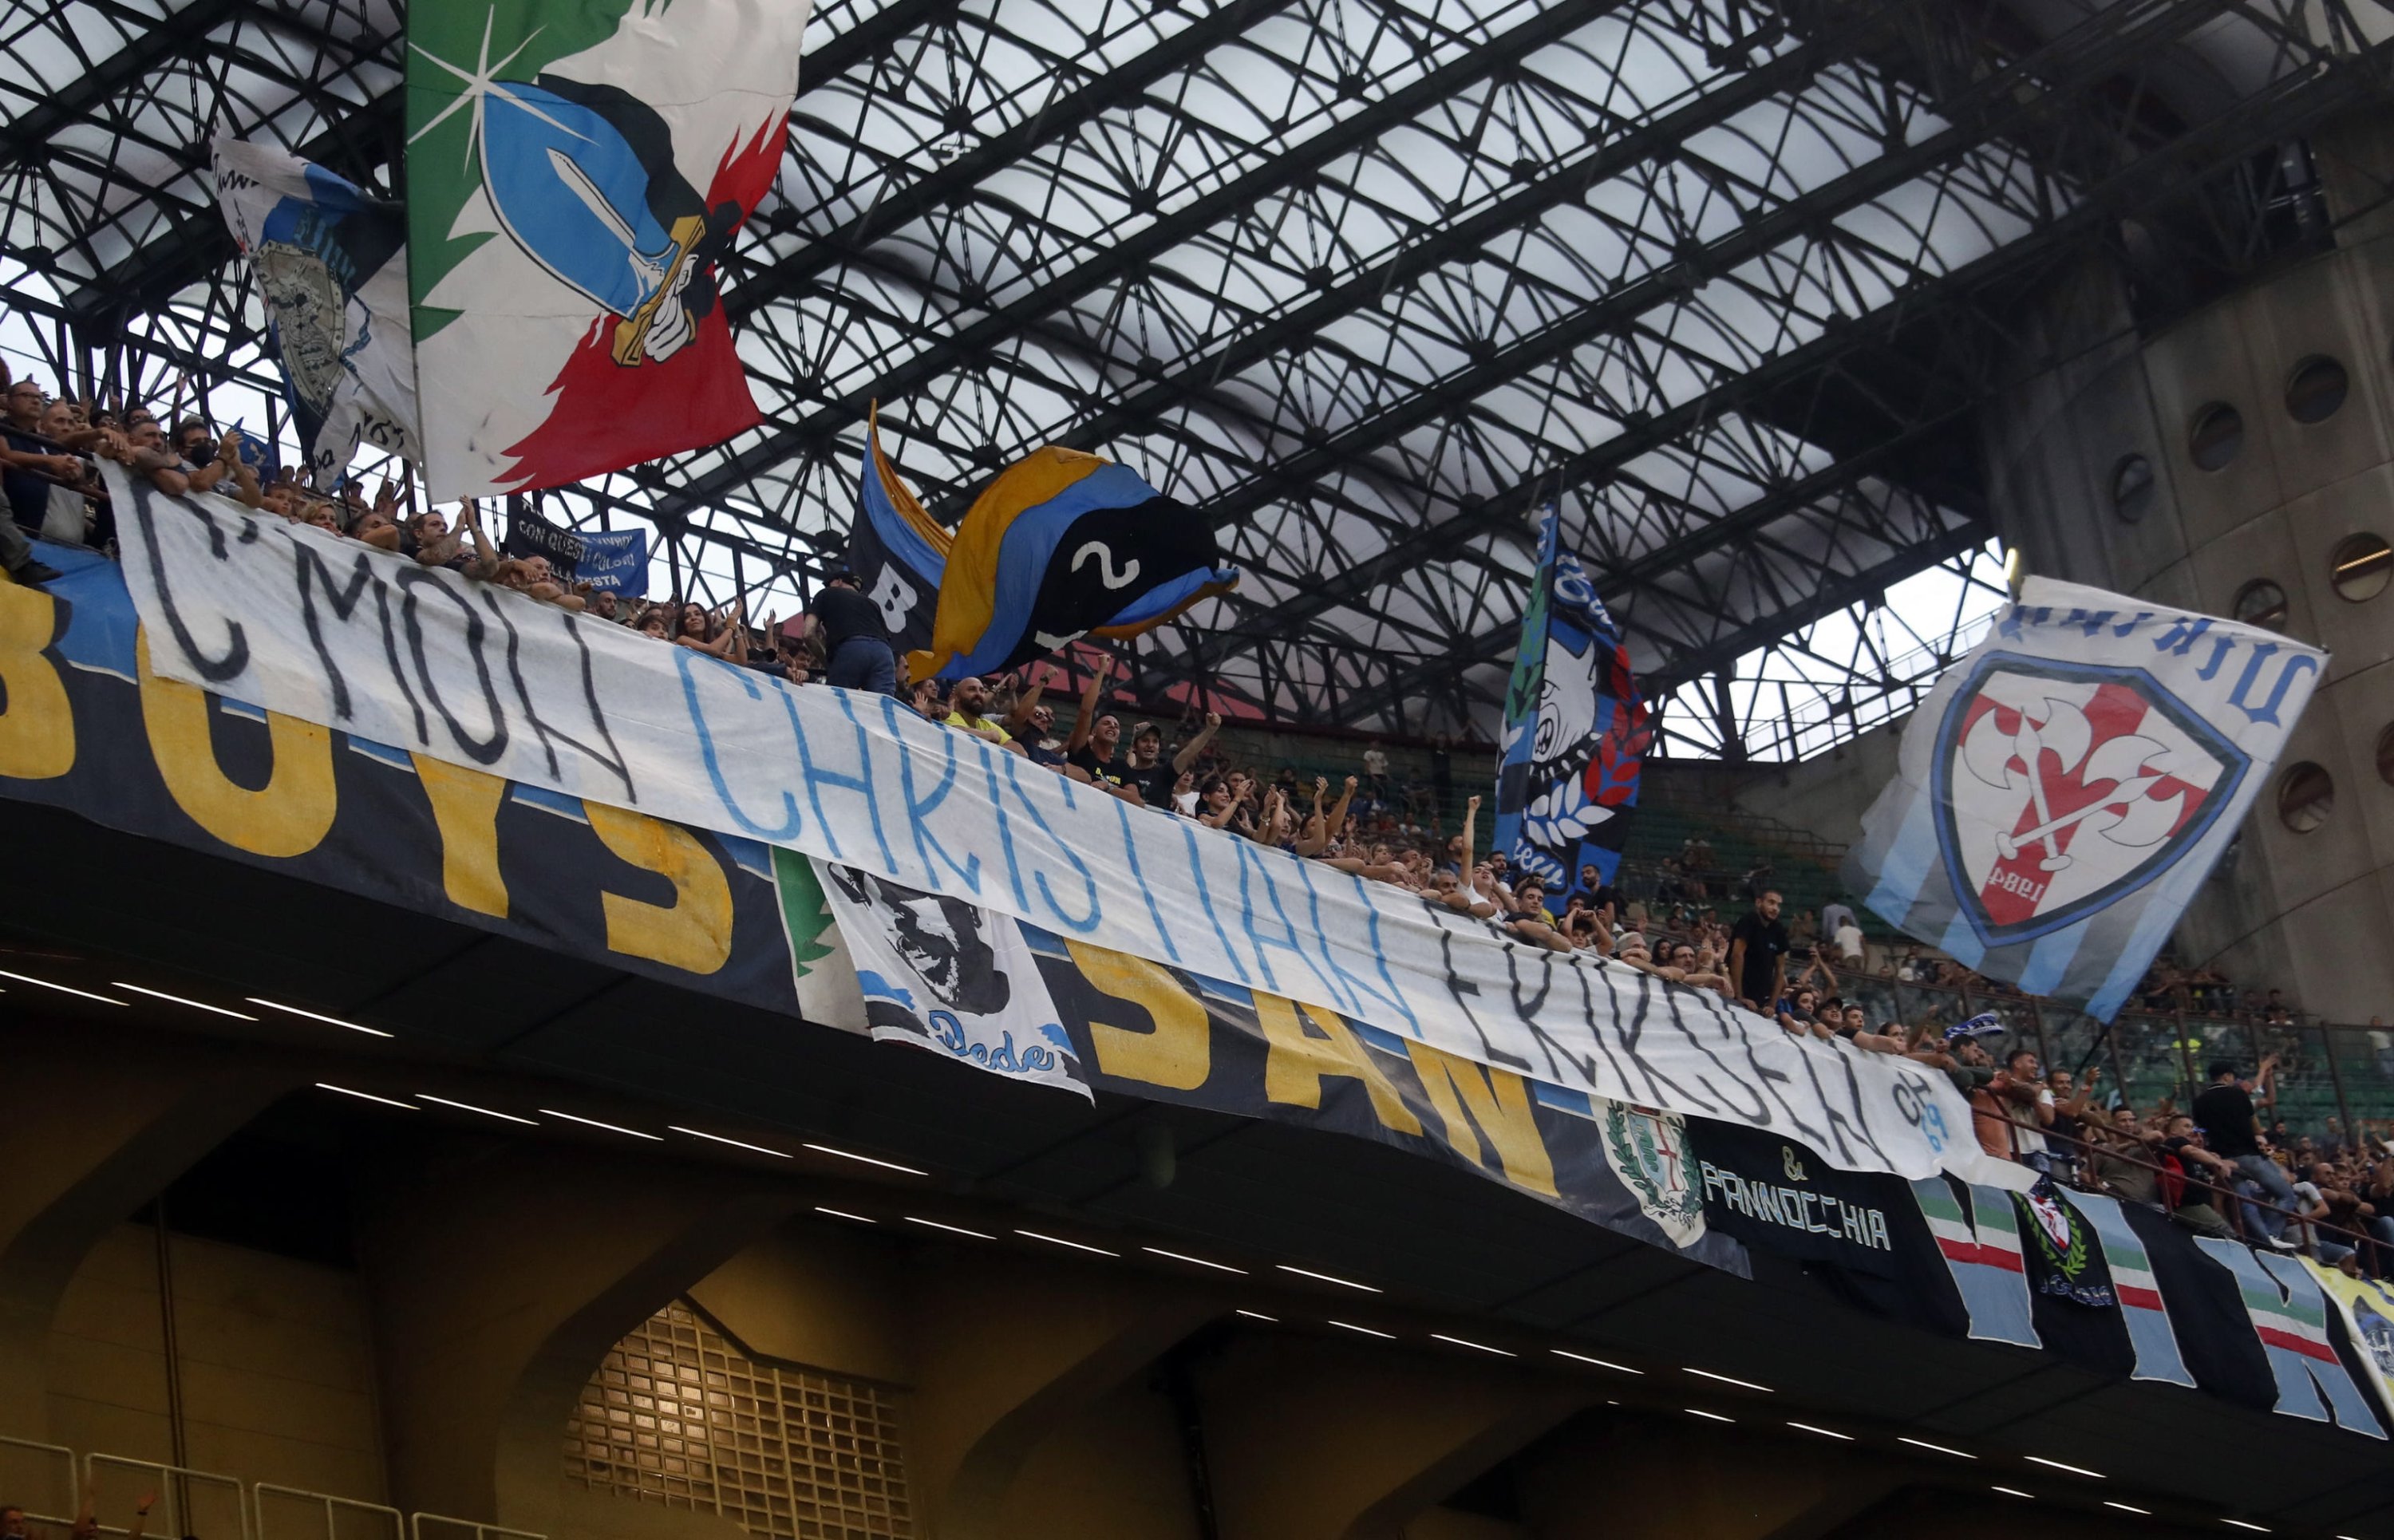 Inter Milan fans display a banner dedicated to Christian Eriksen during the Italian Serie A match against Bologna FC at the San Siro Stadium in Milan, Italy, Sept. 18, 2021. (EPA Photo)